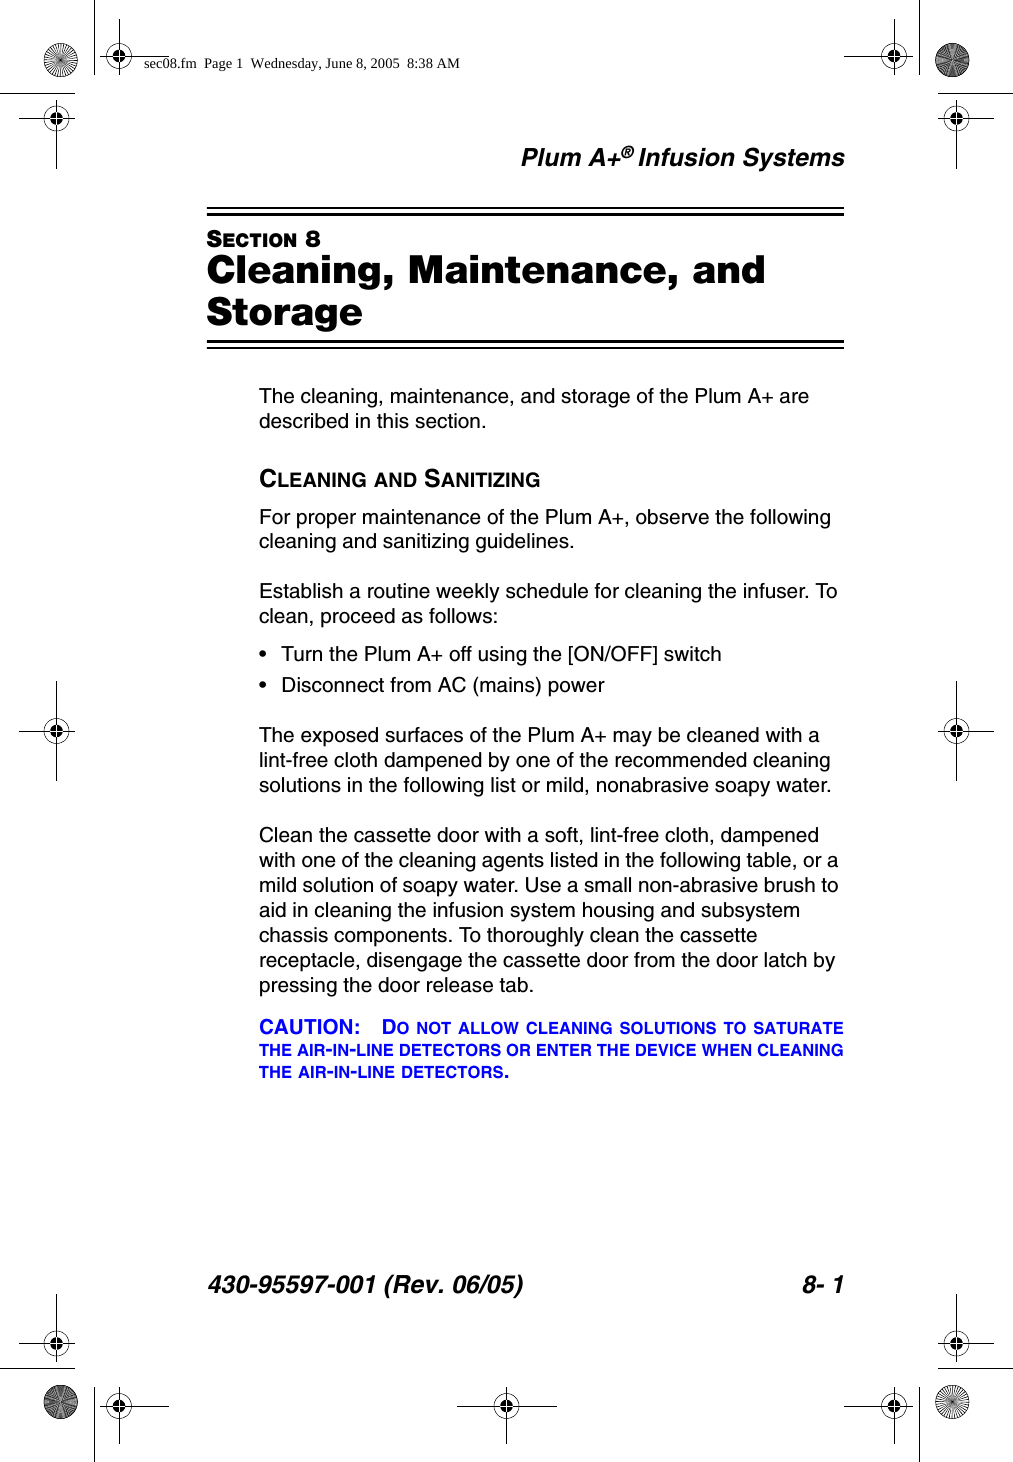 Plum A+® Infusion Systems430-95597-001 (Rev. 06/05) 8- 1SECTION 8Cleaning, Maintenance, and StorageThe cleaning, maintenance, and storage of the Plum A+ are described in this section.CLEANING AND SANITIZINGFor proper maintenance of the Plum A+, observe the following cleaning and sanitizing guidelines.Establish a routine weekly schedule for cleaning the infuser. To clean, proceed as follows:• Turn the Plum A+ off using the [ON/OFF] switch• Disconnect from AC (mains) powerThe exposed surfaces of the Plum A+ may be cleaned with a lint-free cloth dampened by one of the recommended cleaning solutions in the following list or mild, nonabrasive soapy water.Clean the cassette door with a soft, lint-free cloth, dampened with one of the cleaning agents listed in the following table, or a mild solution of soapy water. Use a small non-abrasive brush to aid in cleaning the infusion system housing and subsystem chassis components. To thoroughly clean the cassette receptacle, disengage the cassette door from the door latch by pressing the door release tab.CAUTION: DO NOT ALLOW CLEANING SOLUTIONS TO SATURATETHE AIR-IN-LINE DETECTORS OR ENTER THE DEVICE WHEN CLEANINGTHE AIR-IN-LINE DETECTORS.sec08.fm  Page 1  Wednesday, June 8, 2005  8:38 AM